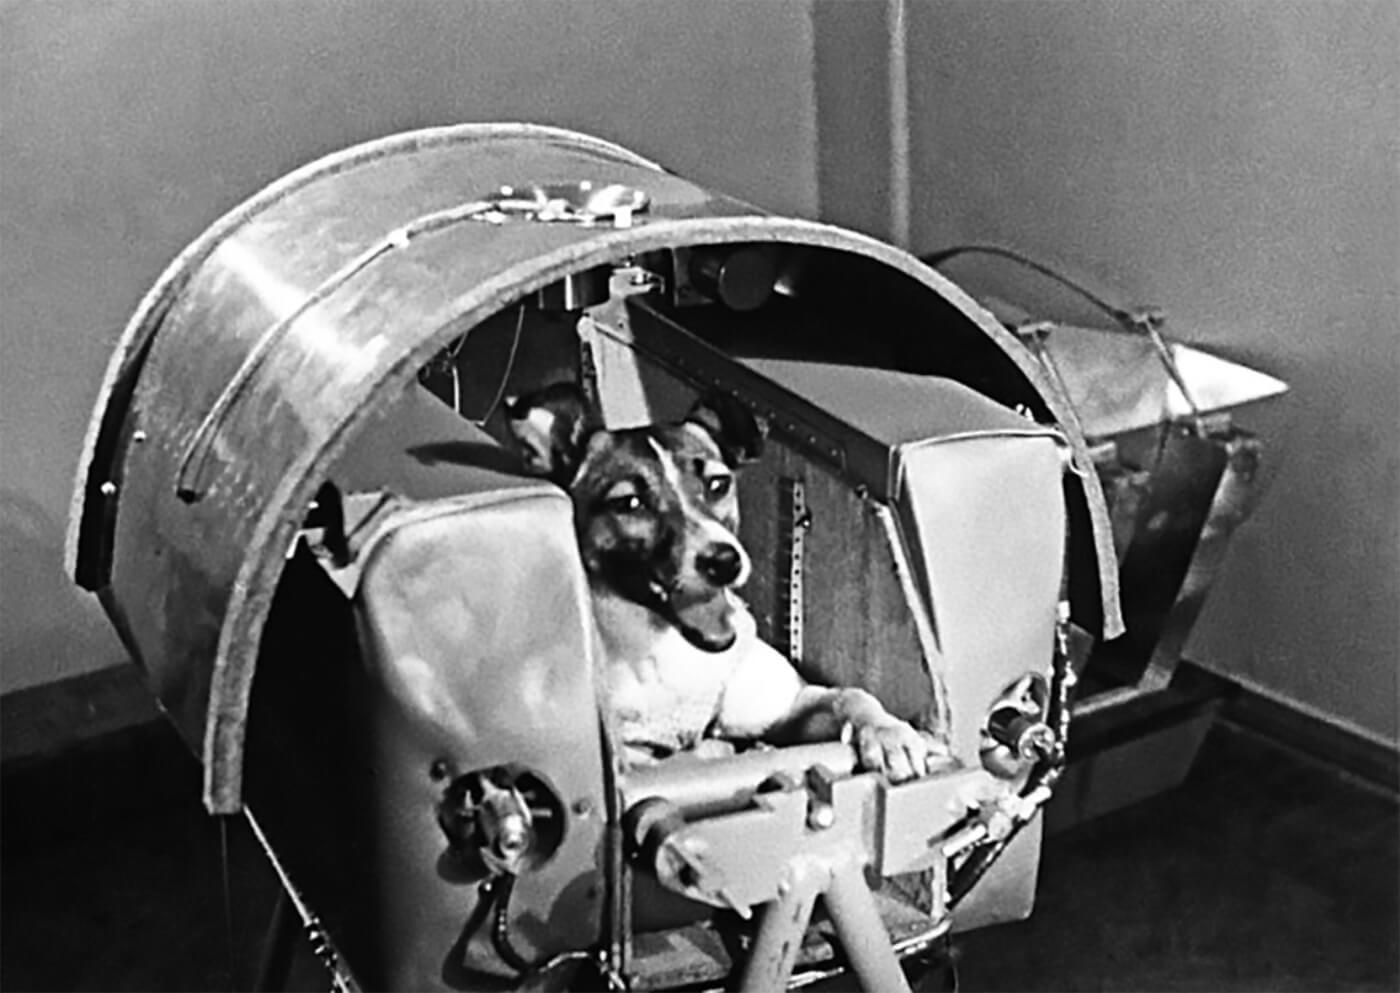 Laika, a Moscow stray dog, launched in Sputnik 2 on November 3, 1957. She died of overheating on reentry